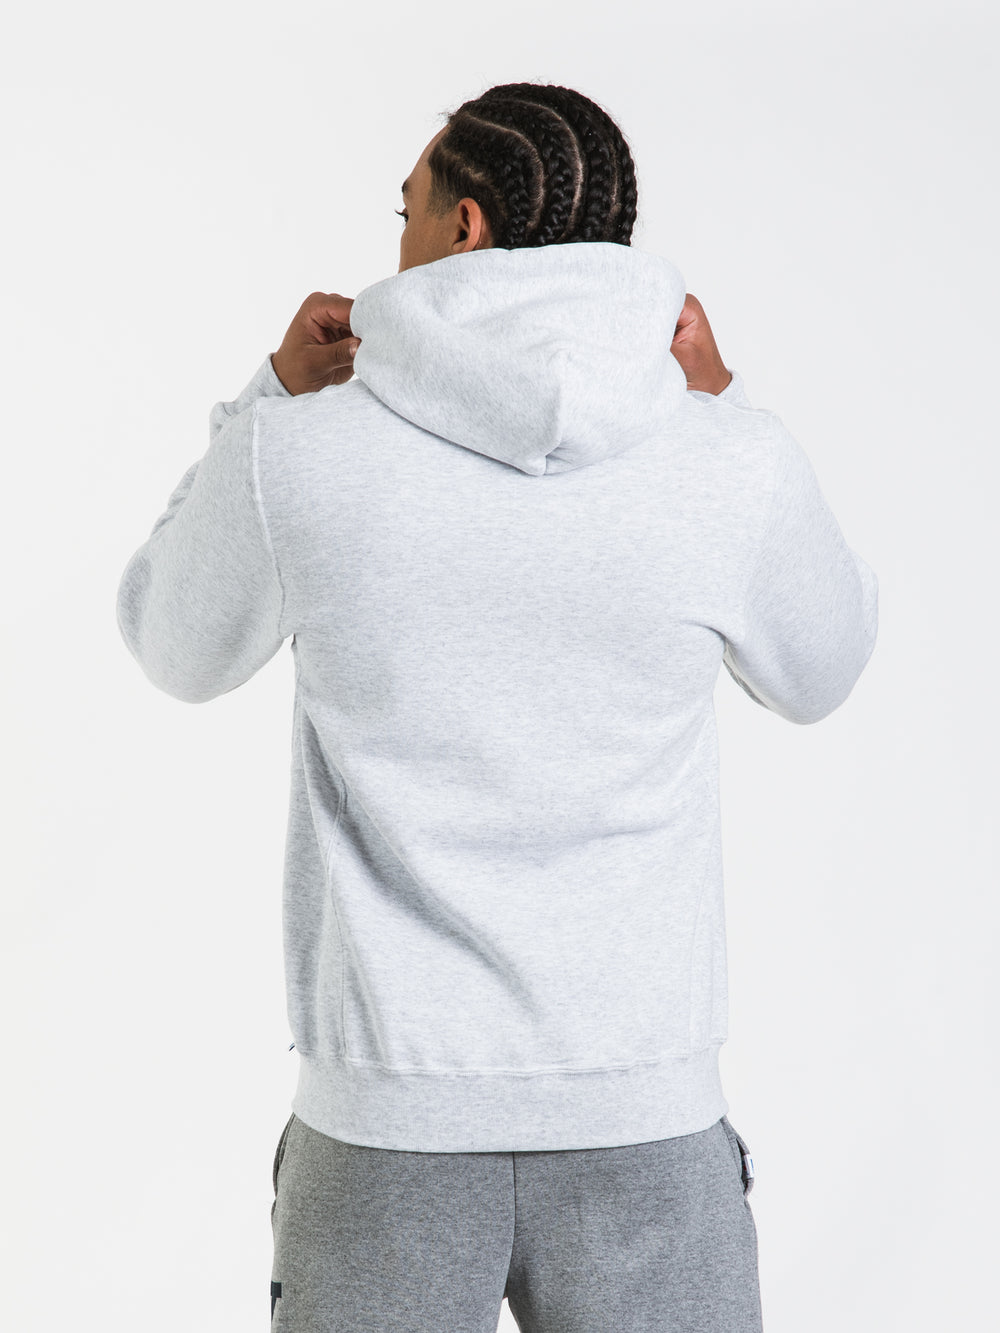 RUSSELL YALE PULLOVER HOODIE - CLEARANCE